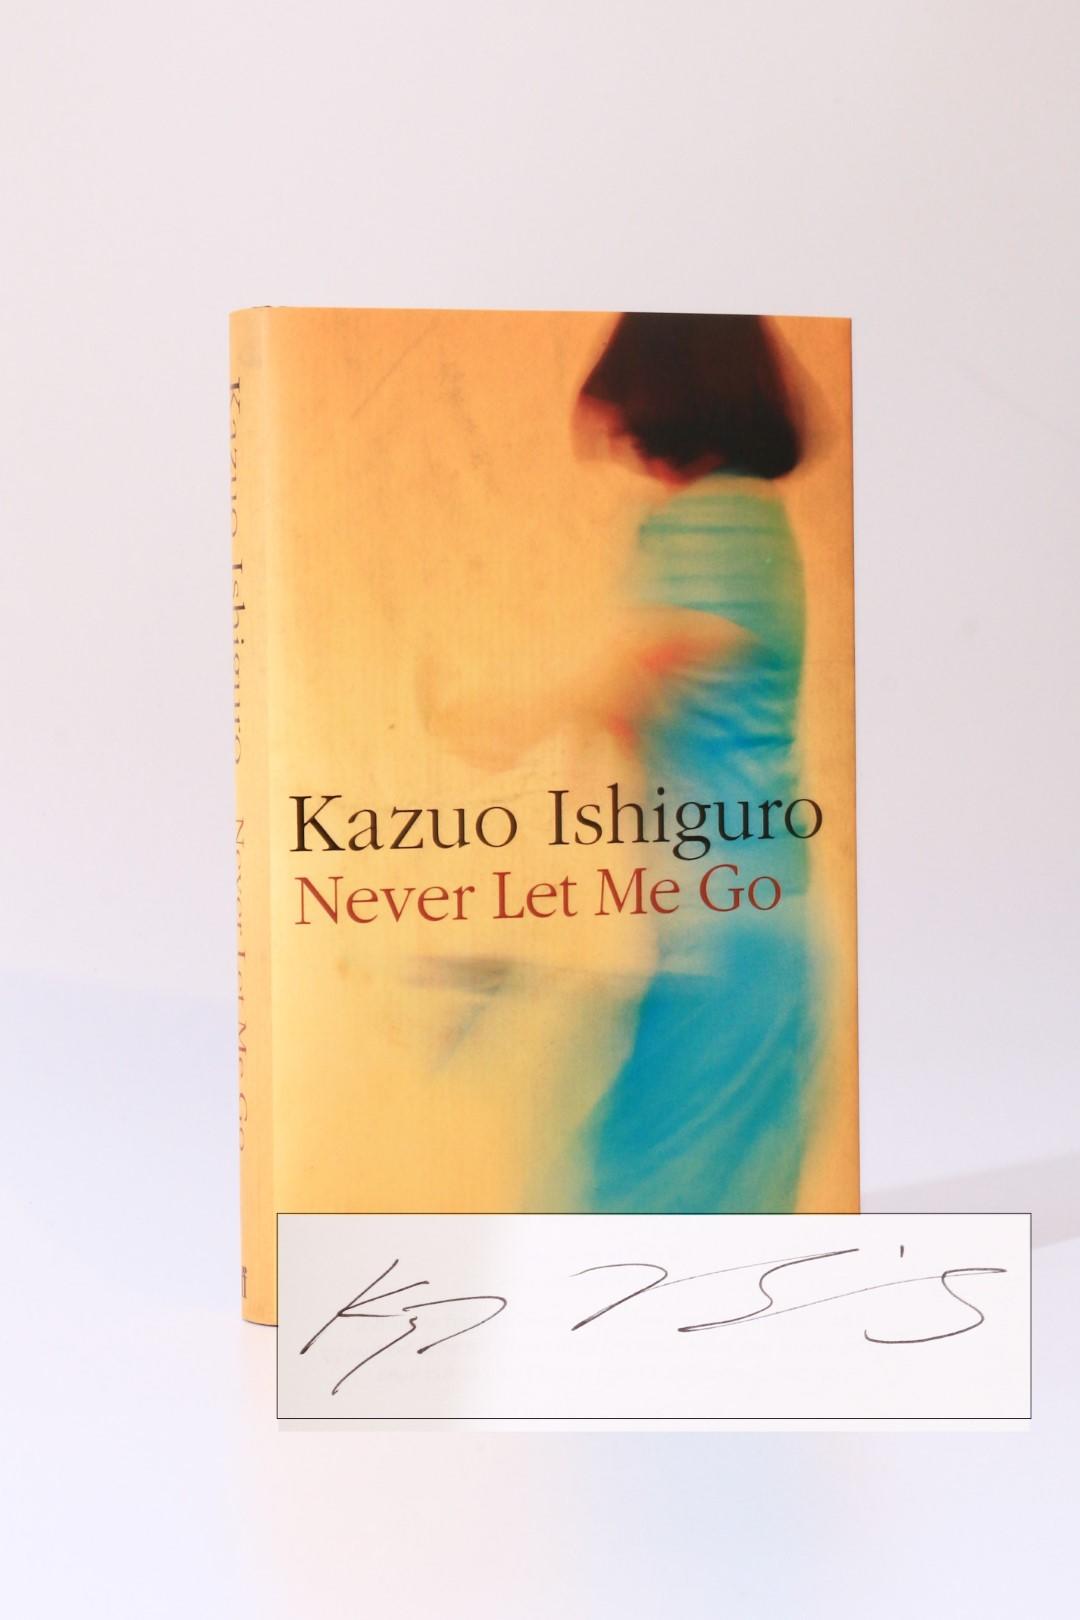 Kazuo Ishiguro - Never Let Me Go - Faber & Faber, 2005, Signed First Edition.